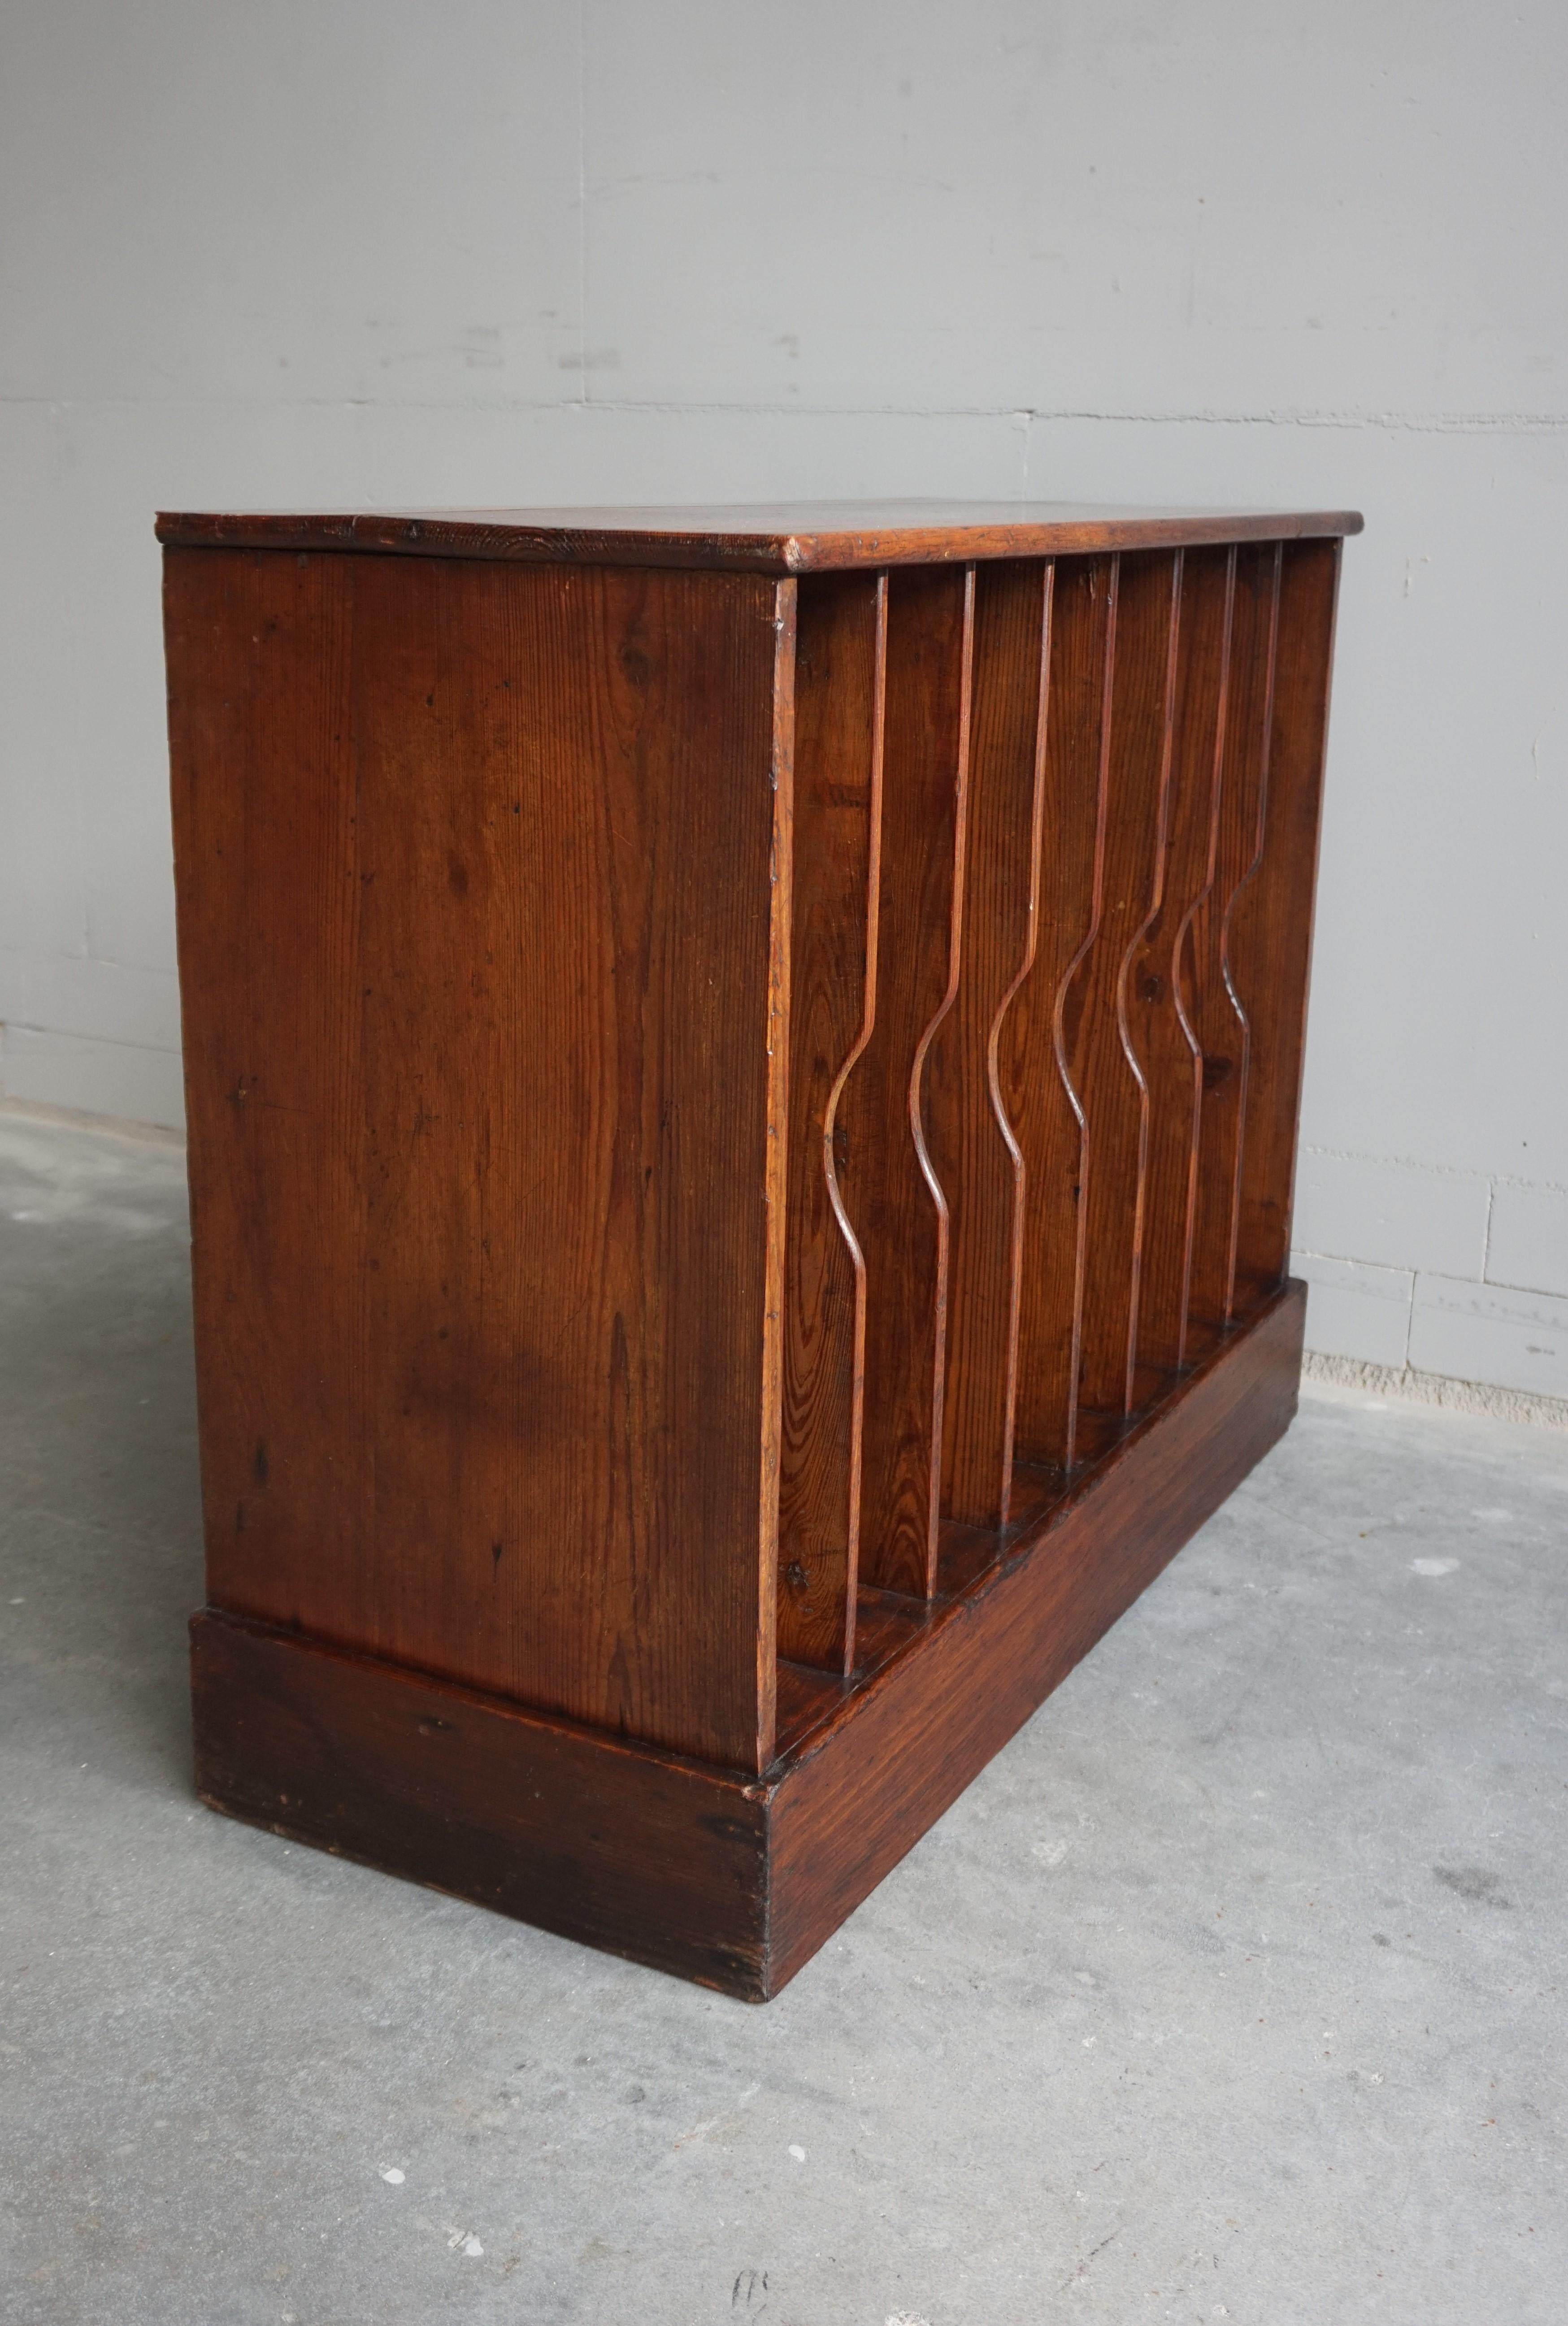 Multi purpose and practical size floor cabinet from the early 1900s.

We may never know what this practical and good looking cabinet was initially made for, but we found it filled with bottles of red wine. With eight compartments holding up to seven